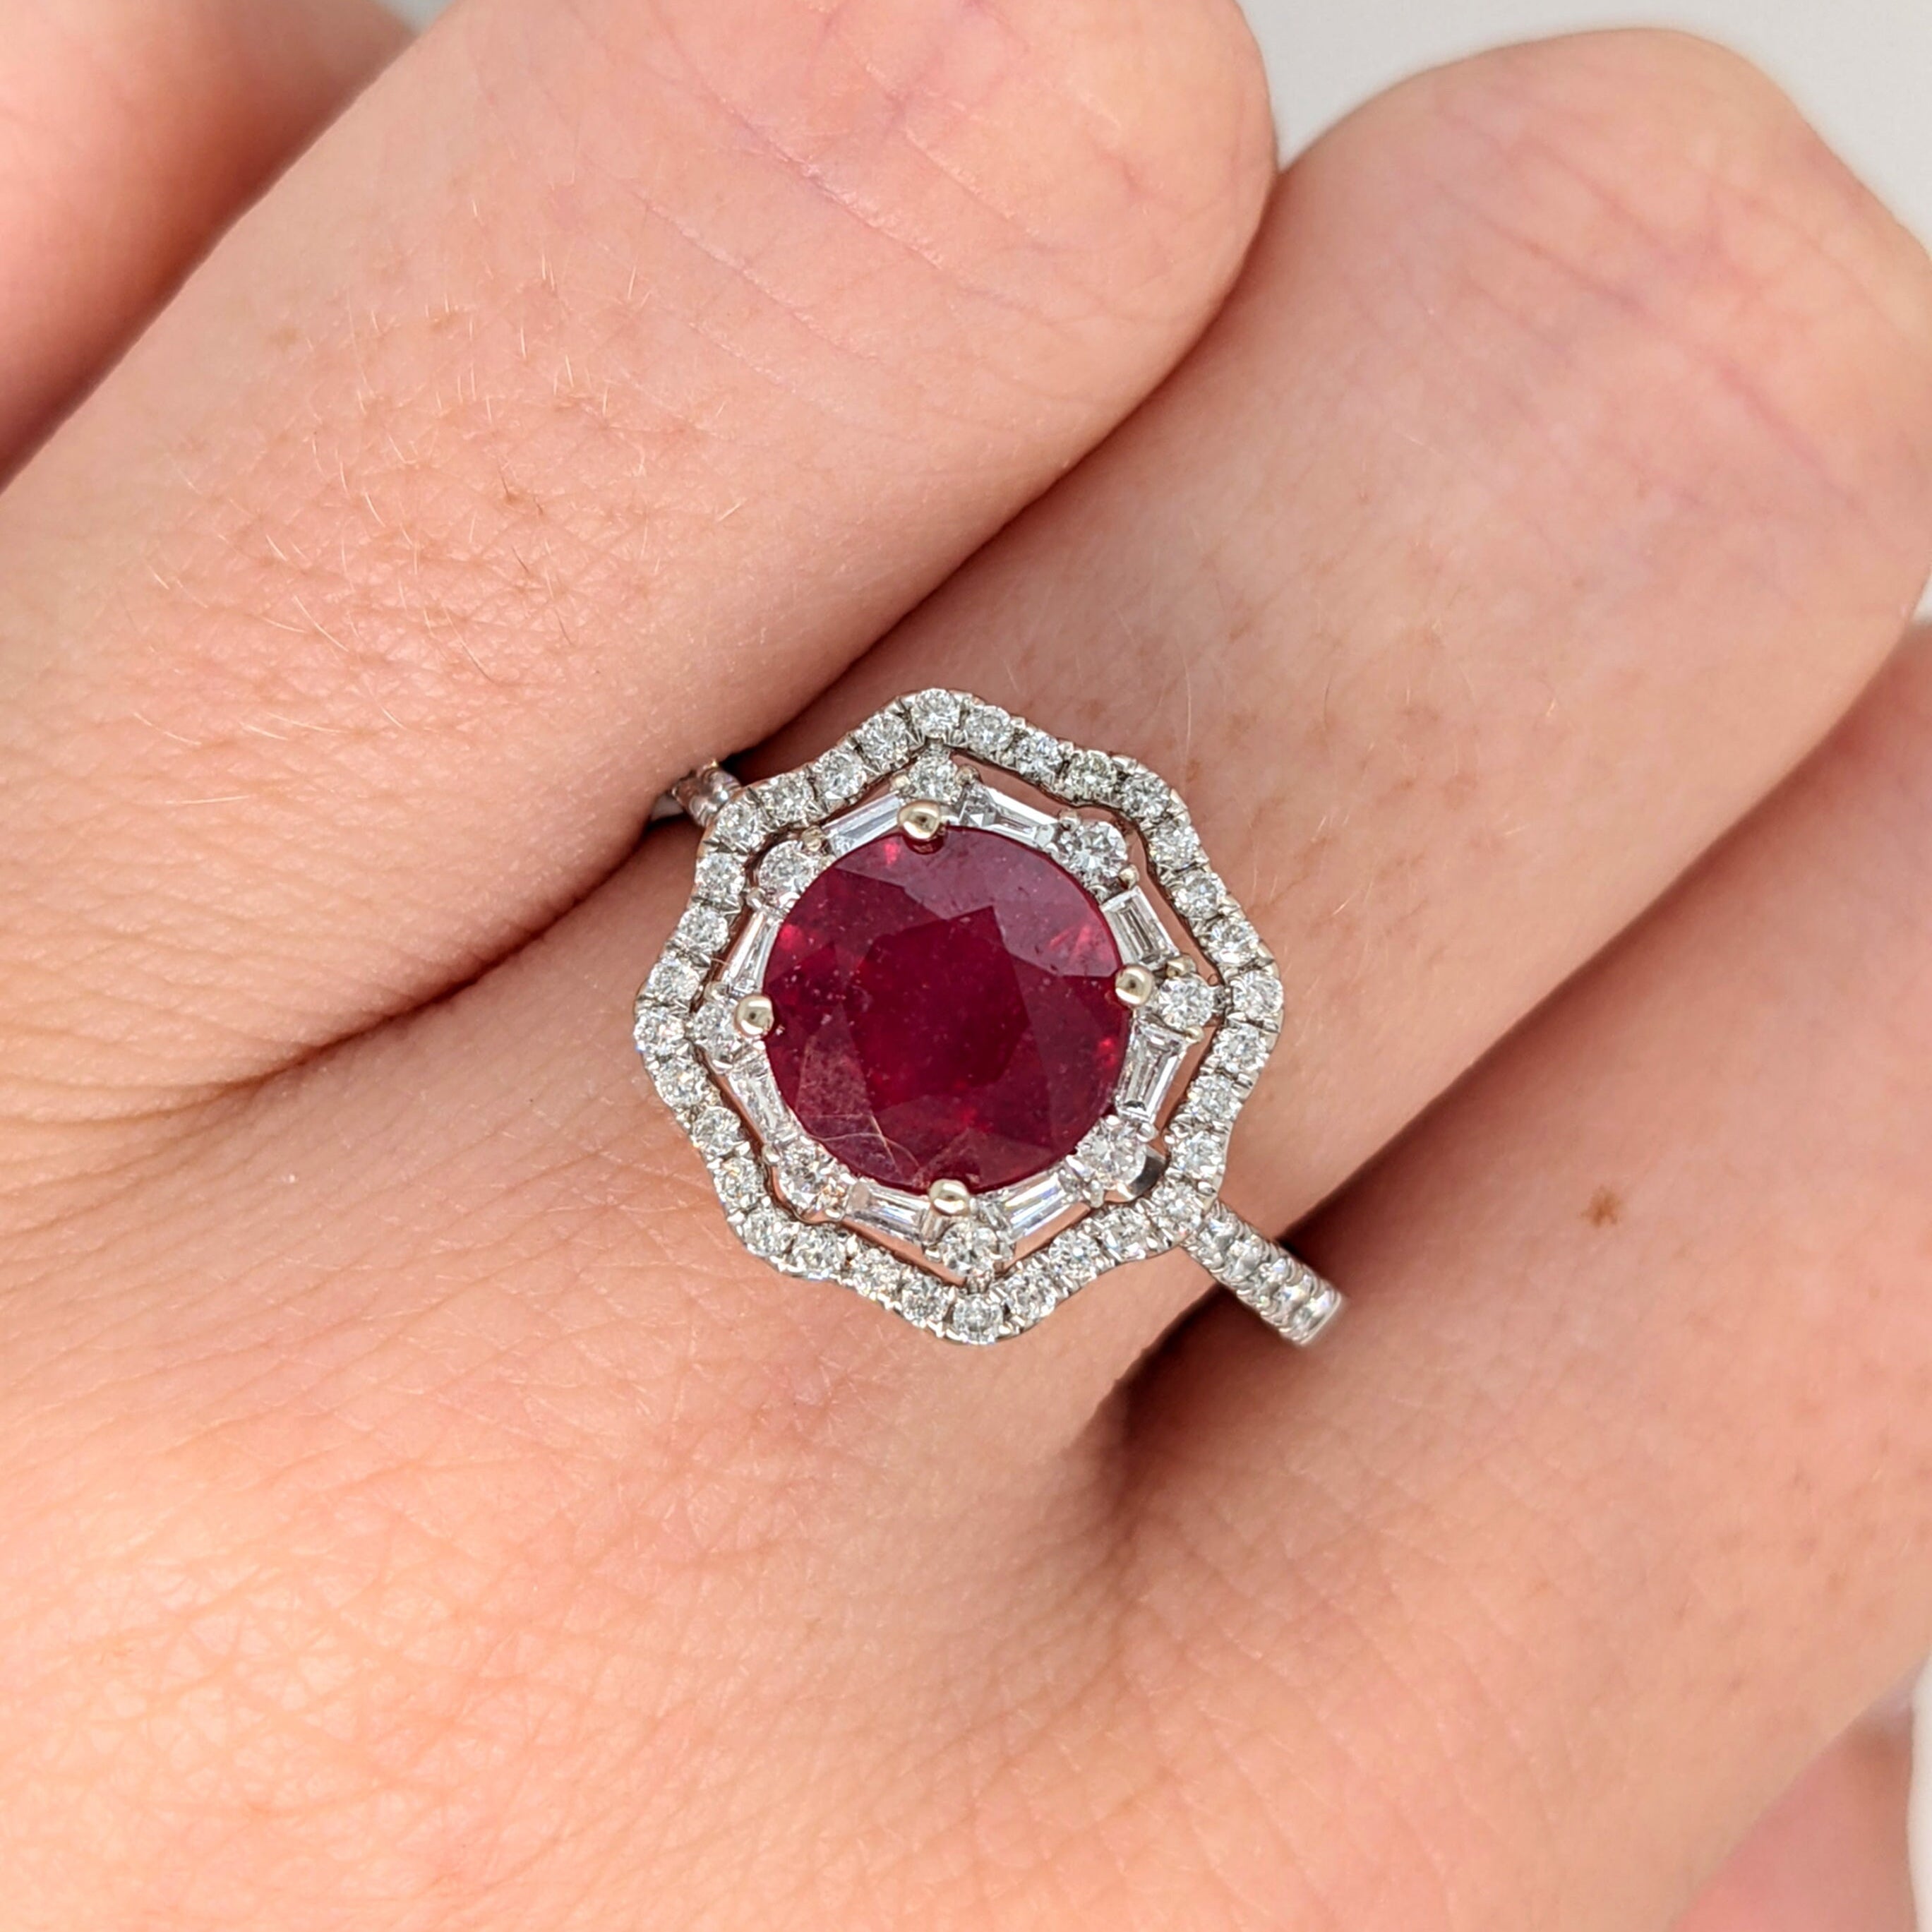 Earth Mined Red Ruby in 14k White Gold Art Deco Setting w/ Double Diamond Halo | Round 10mm | July Birthstone | Ruby Cocktail Ring | Sizable